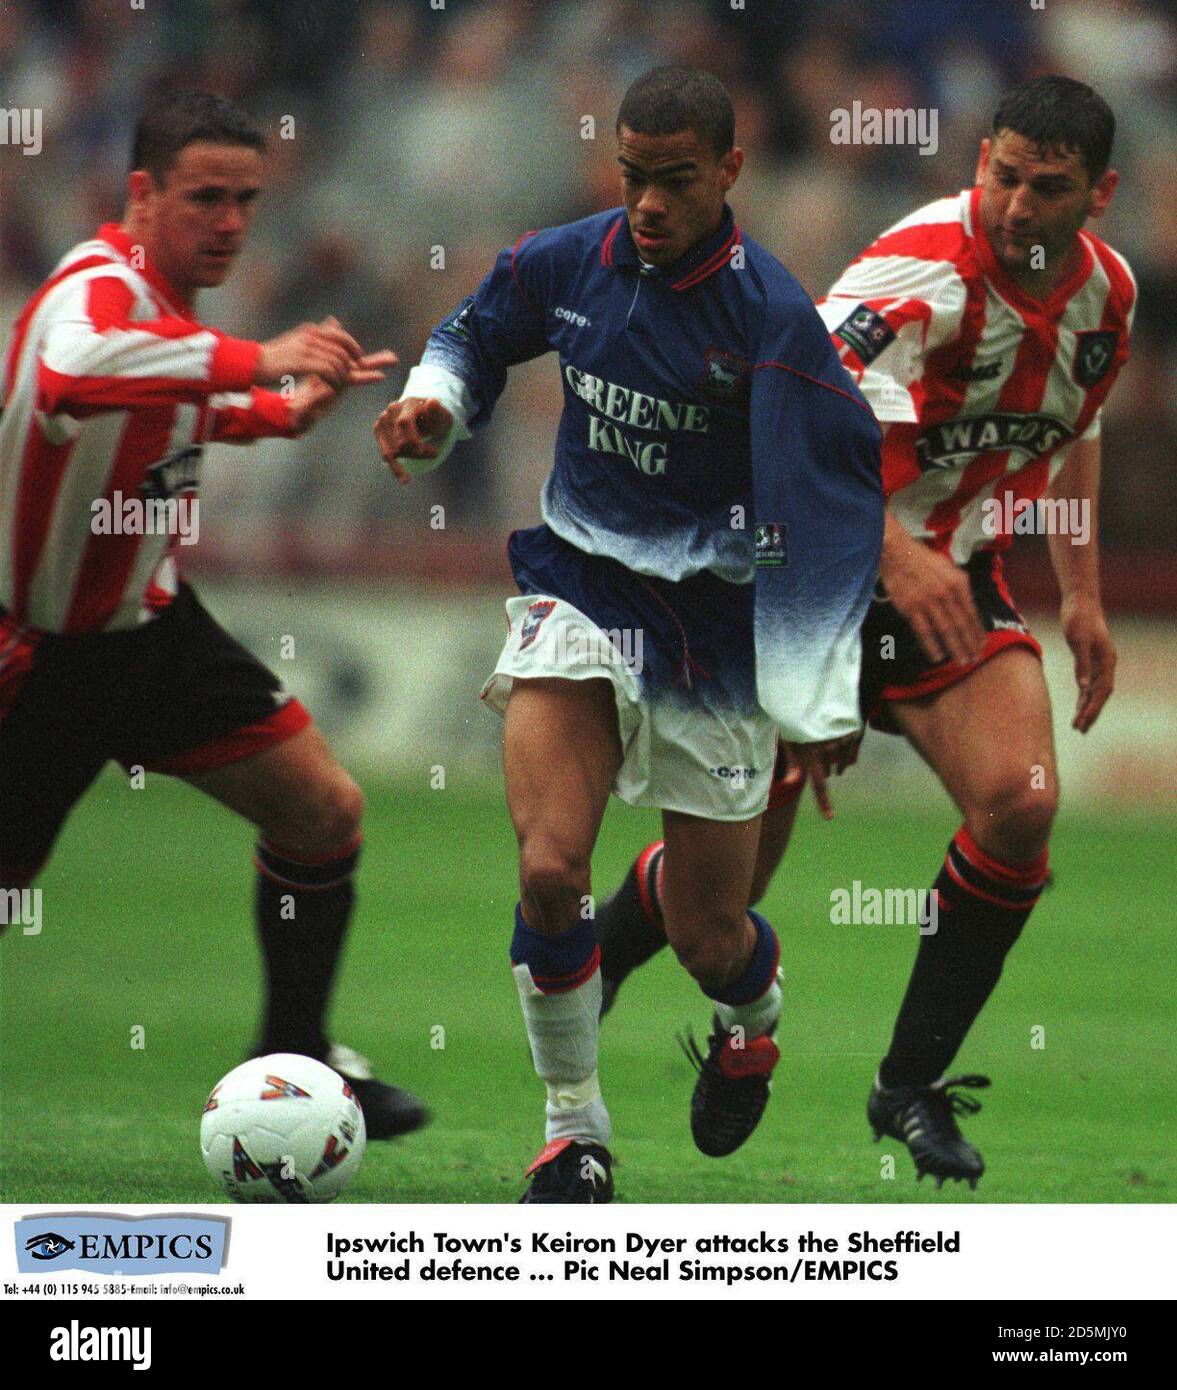 Ipswich Town's Kieron Dyer (c) attacks the Sheffield United defence  Stock Photo